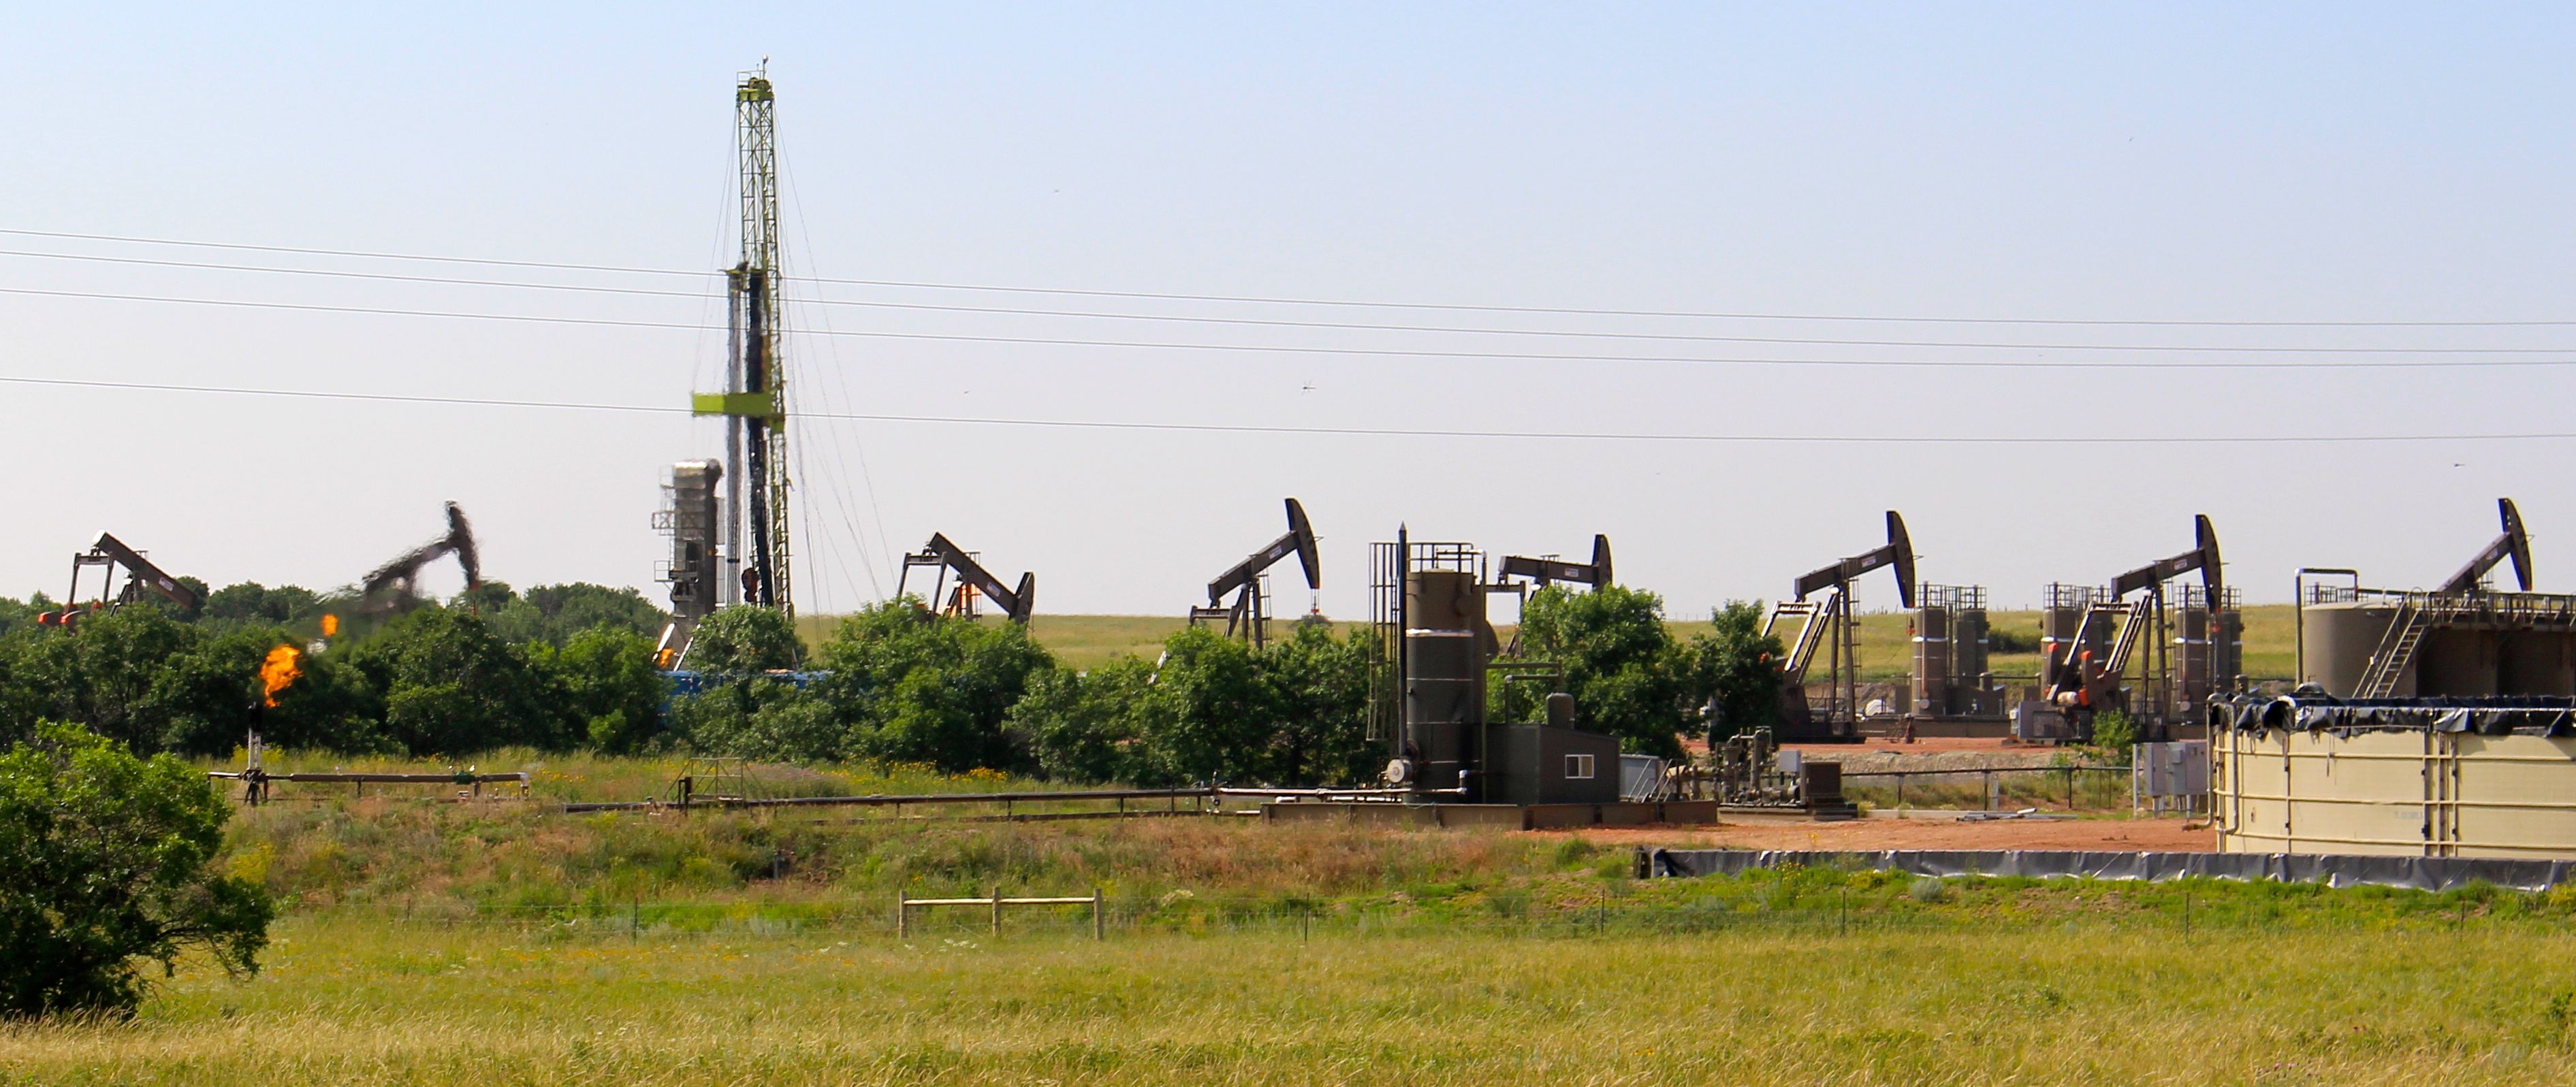 Reserach on unconventional energy development and hydraulic fracturing